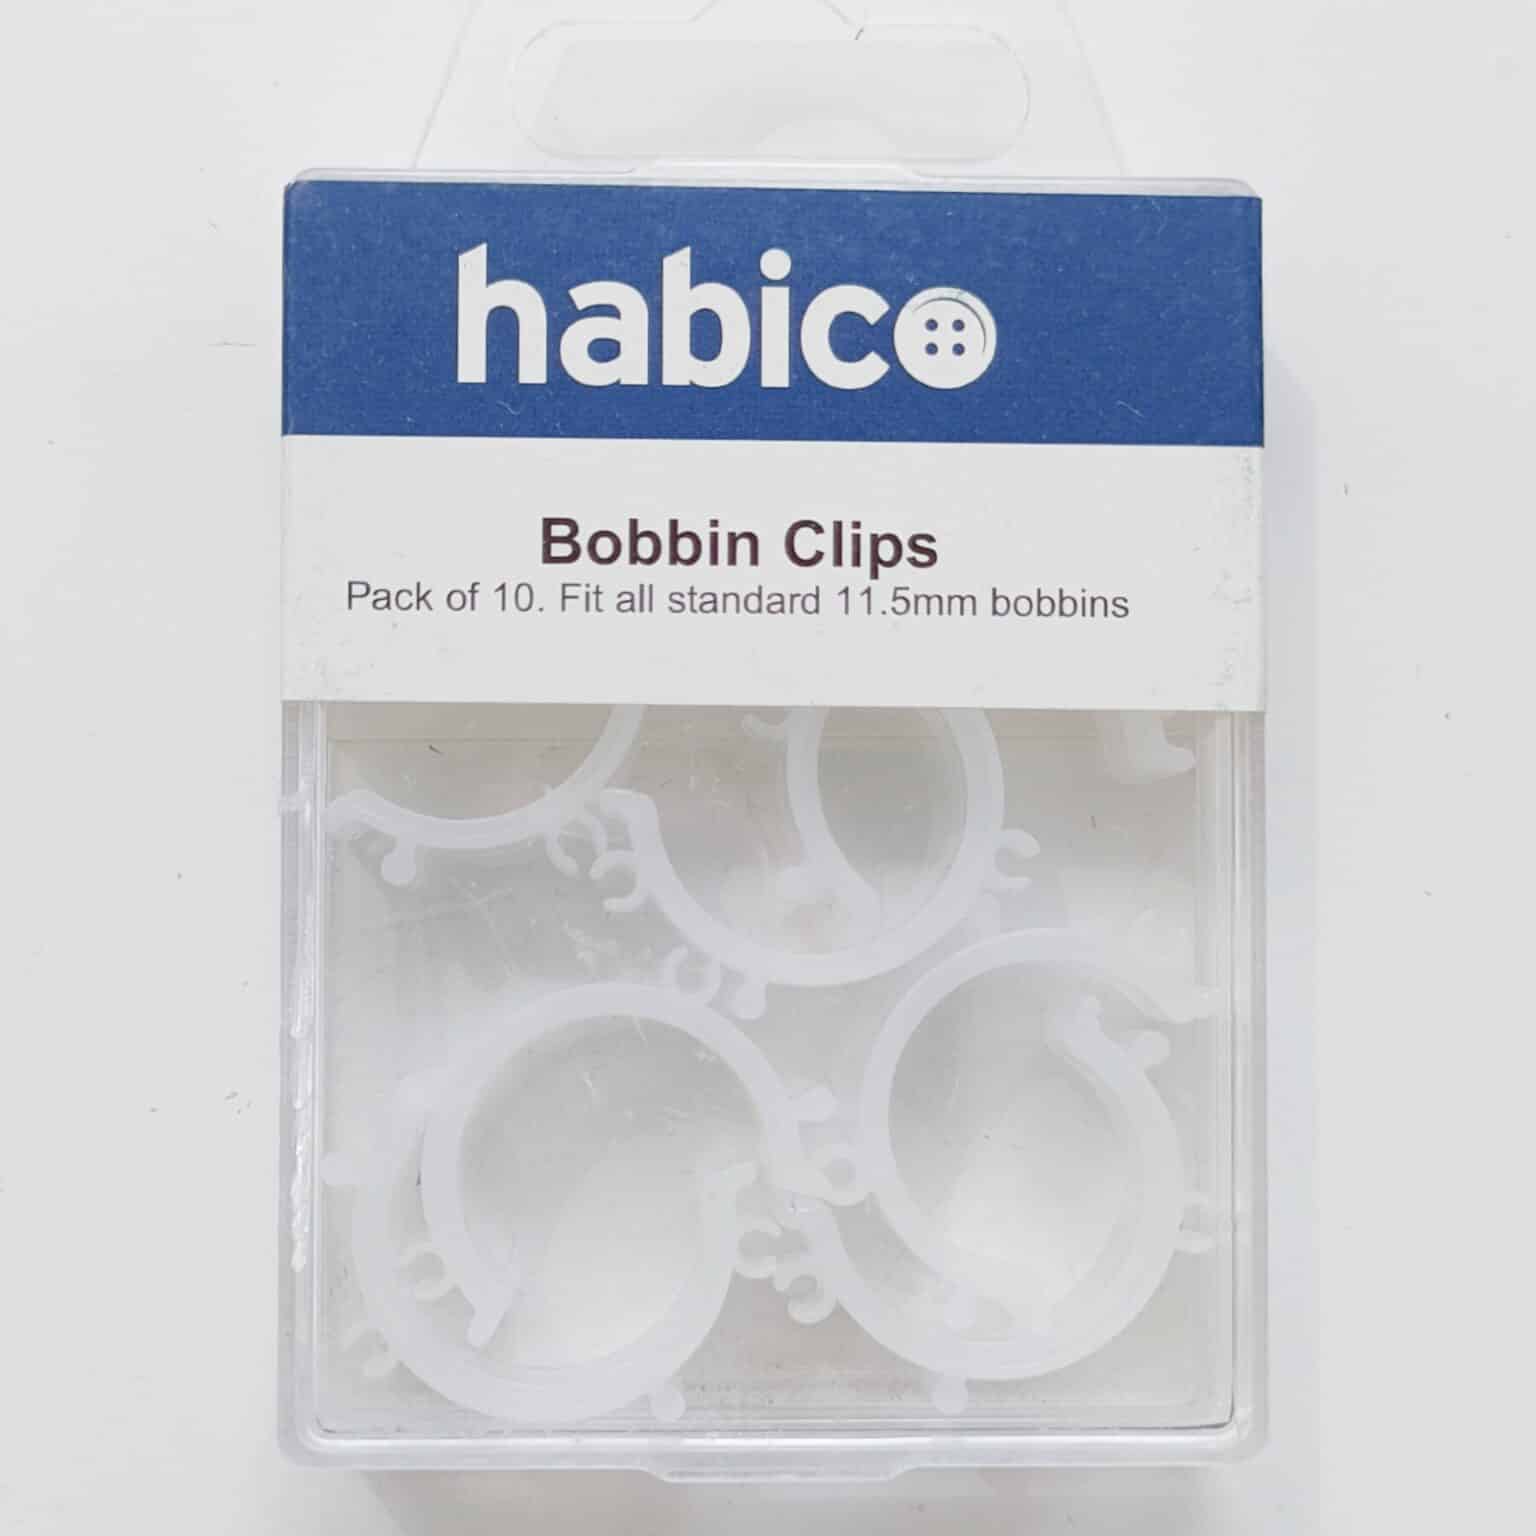 Habico Bobbin Clips Pack Of 10 | More Sewing